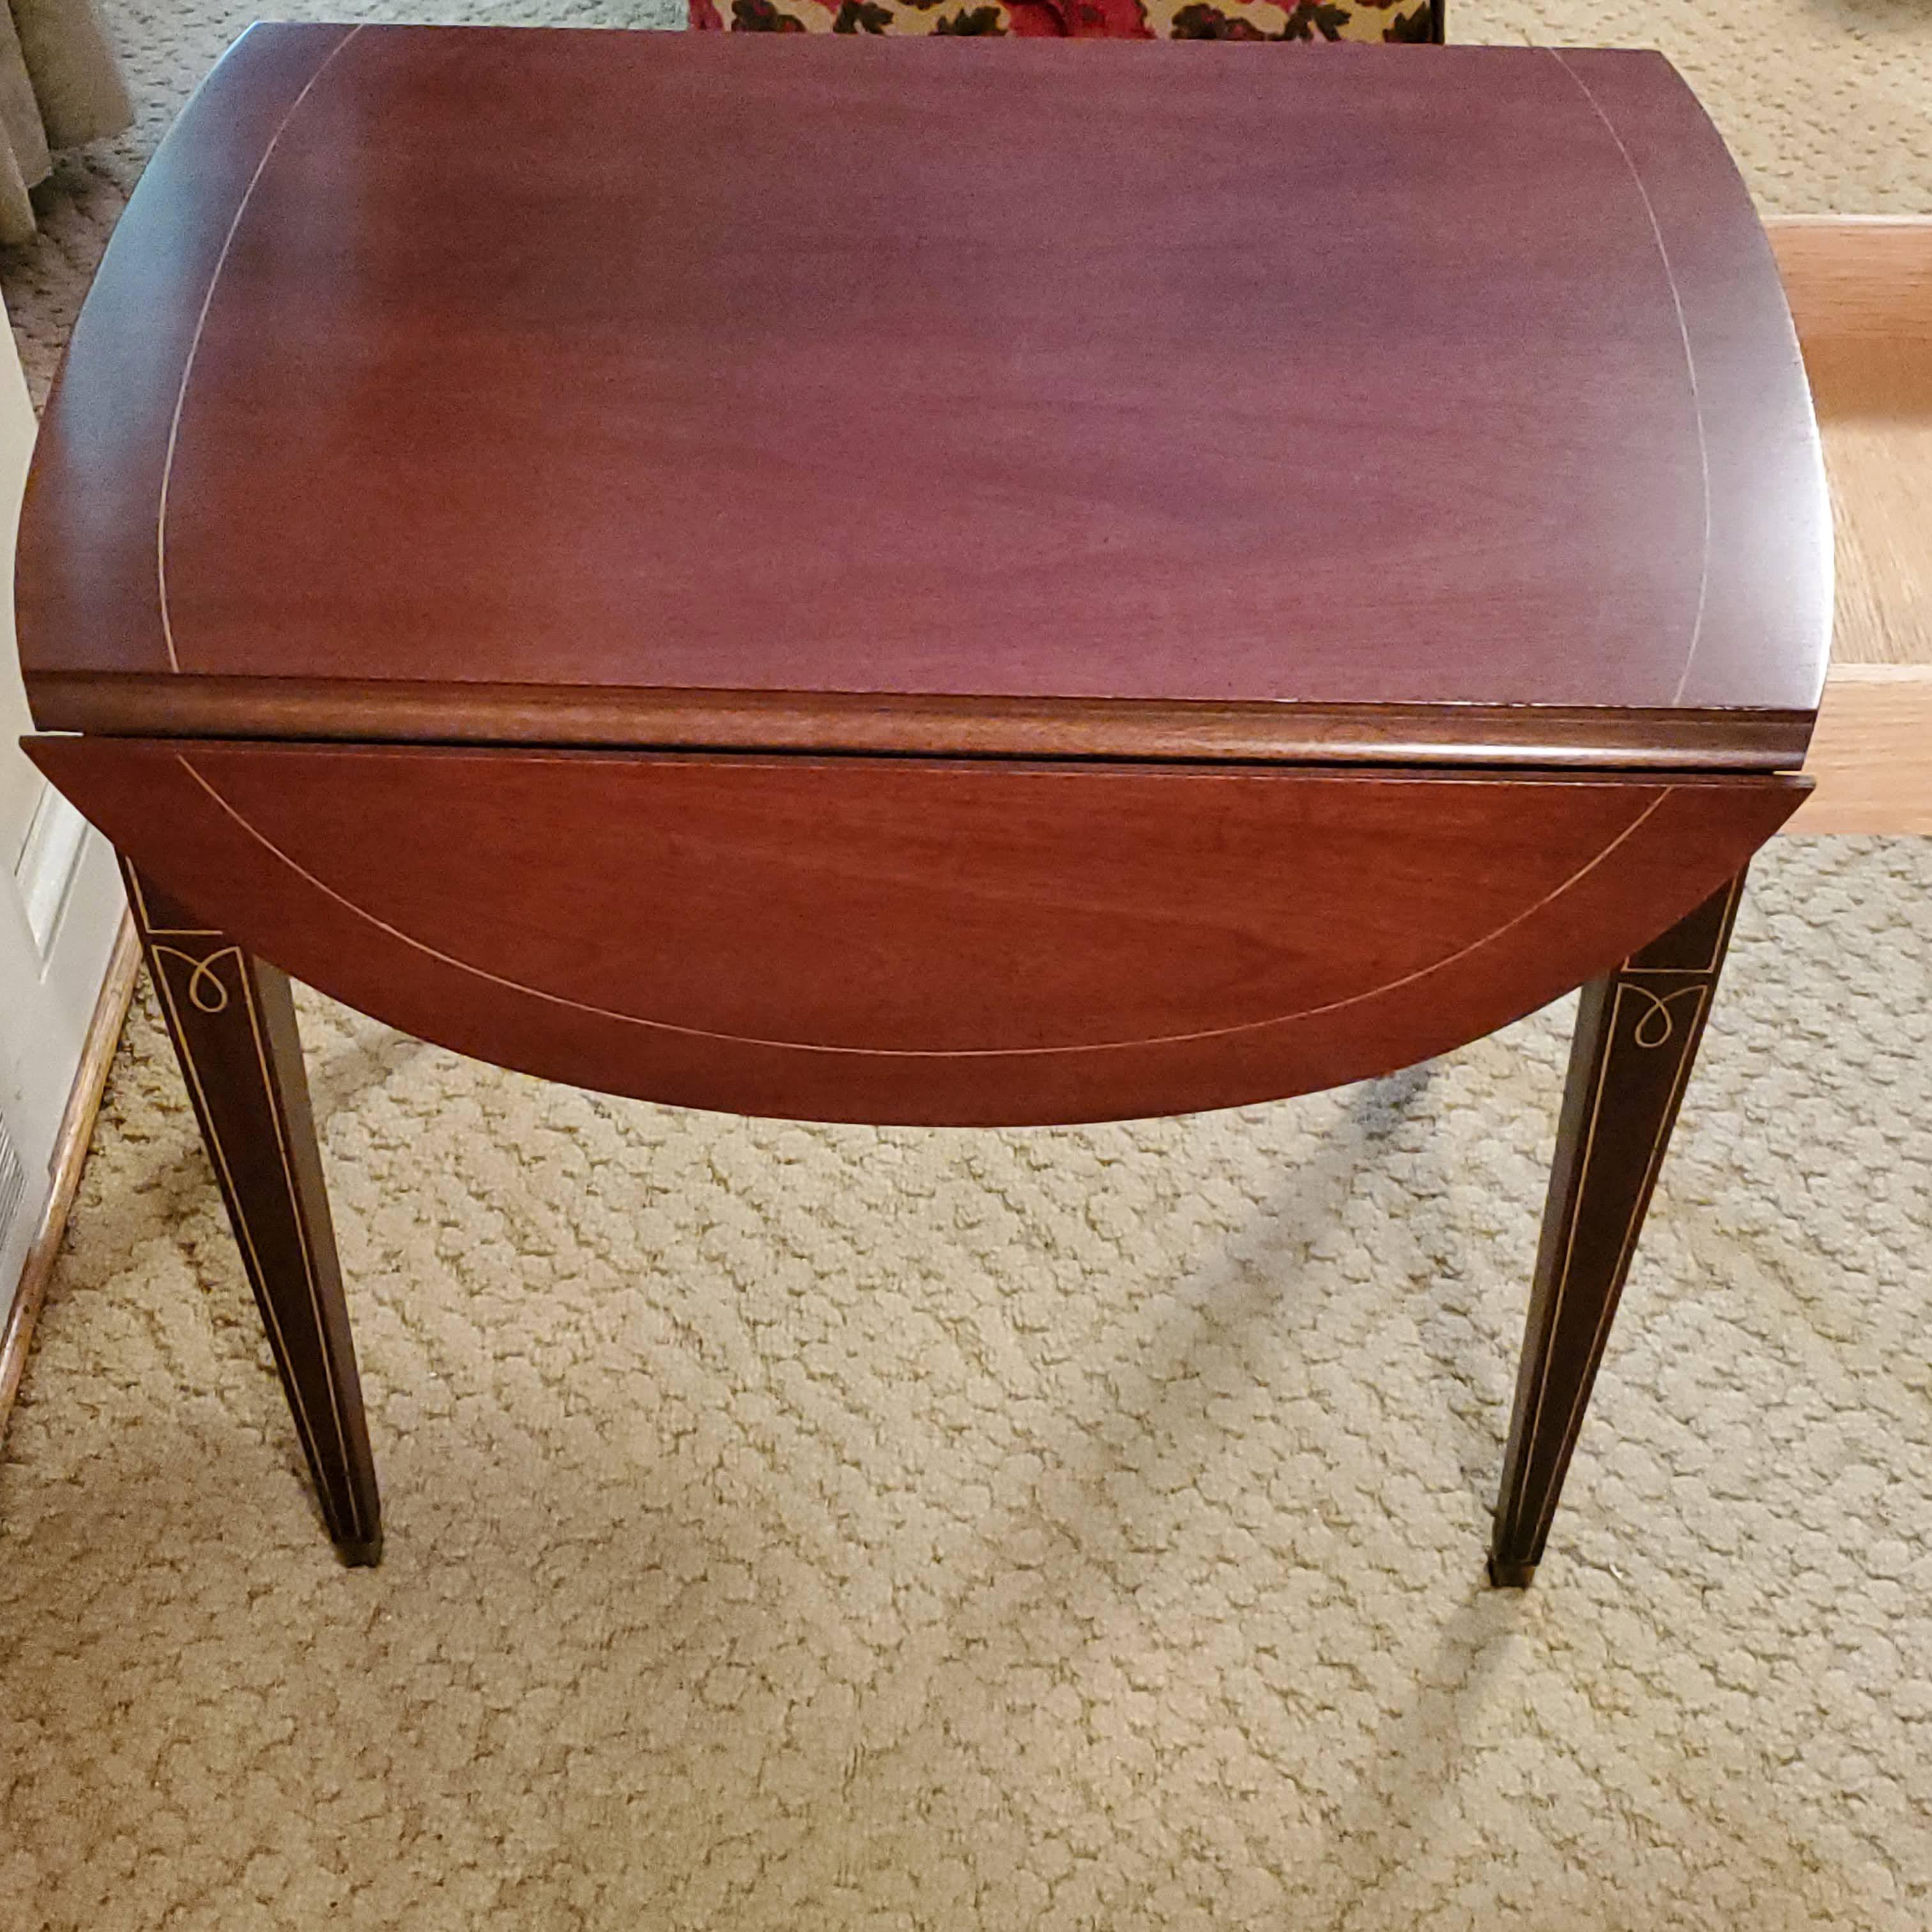 1960’s Pembroke Craftsman Banded Mahogany Wood Side Table with Folding Sides and Dovetail Drawer